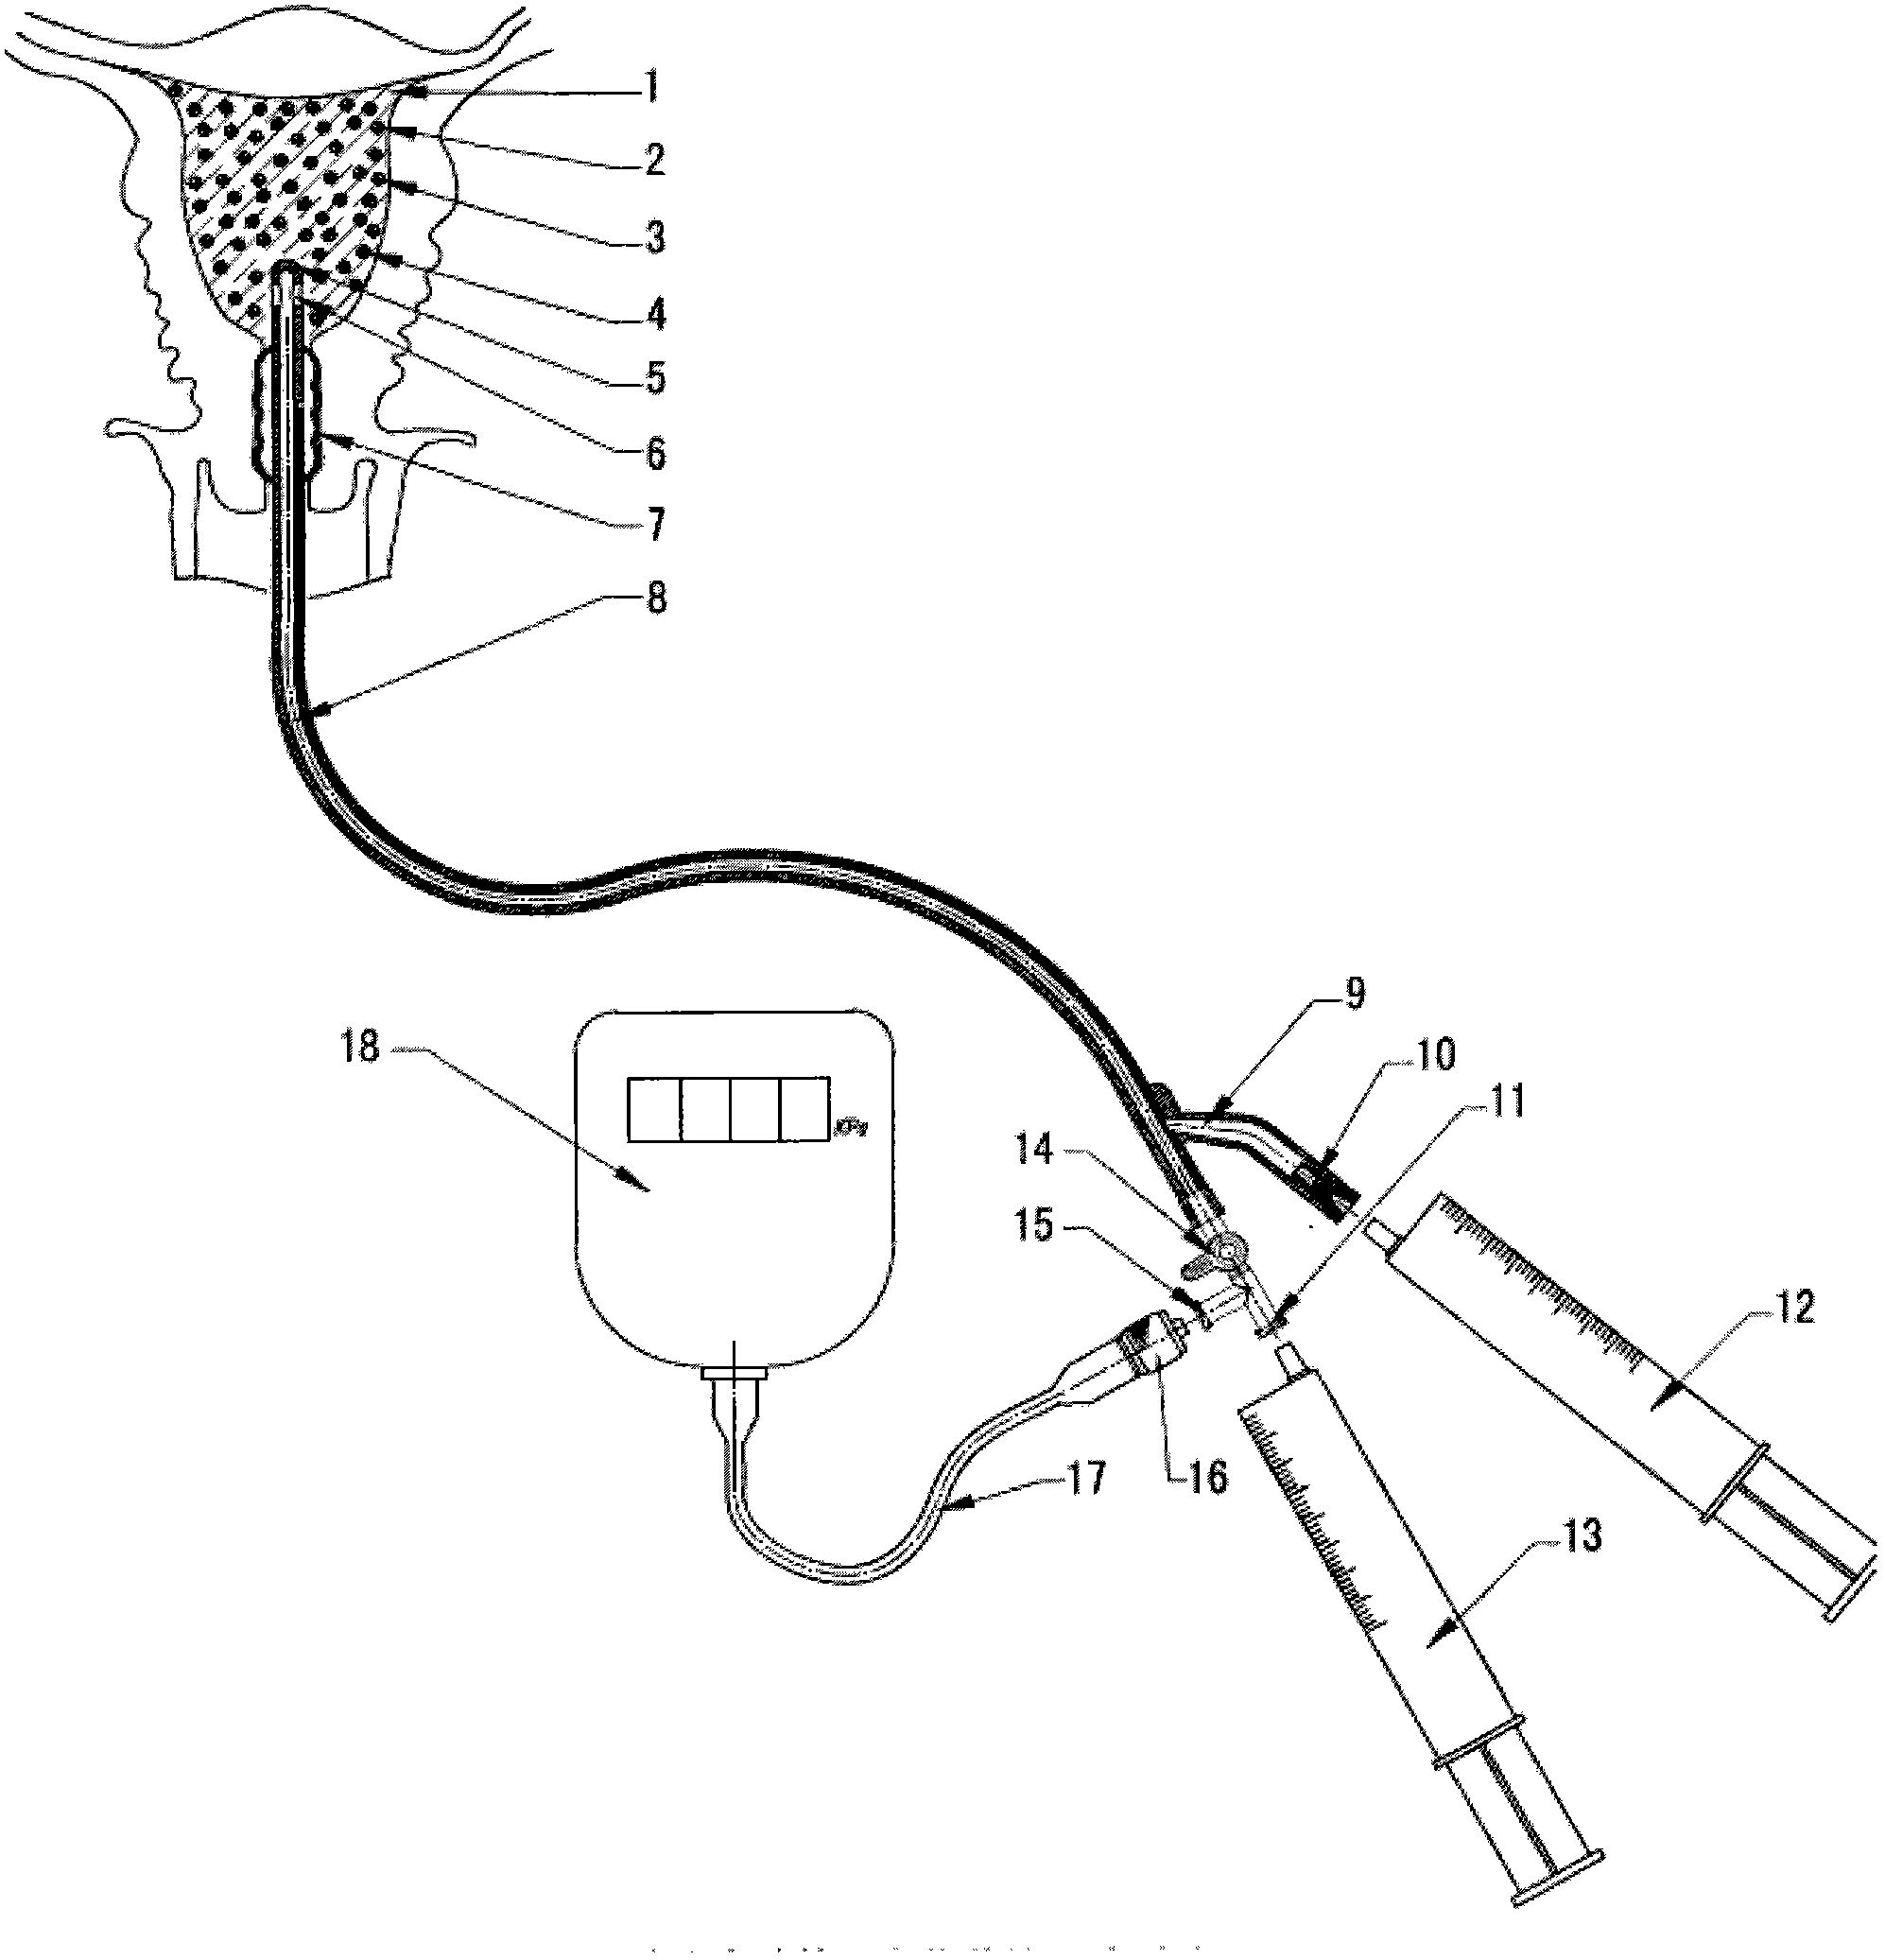 Carrier barrier system applied to prevention and treatment of metrosynizesis